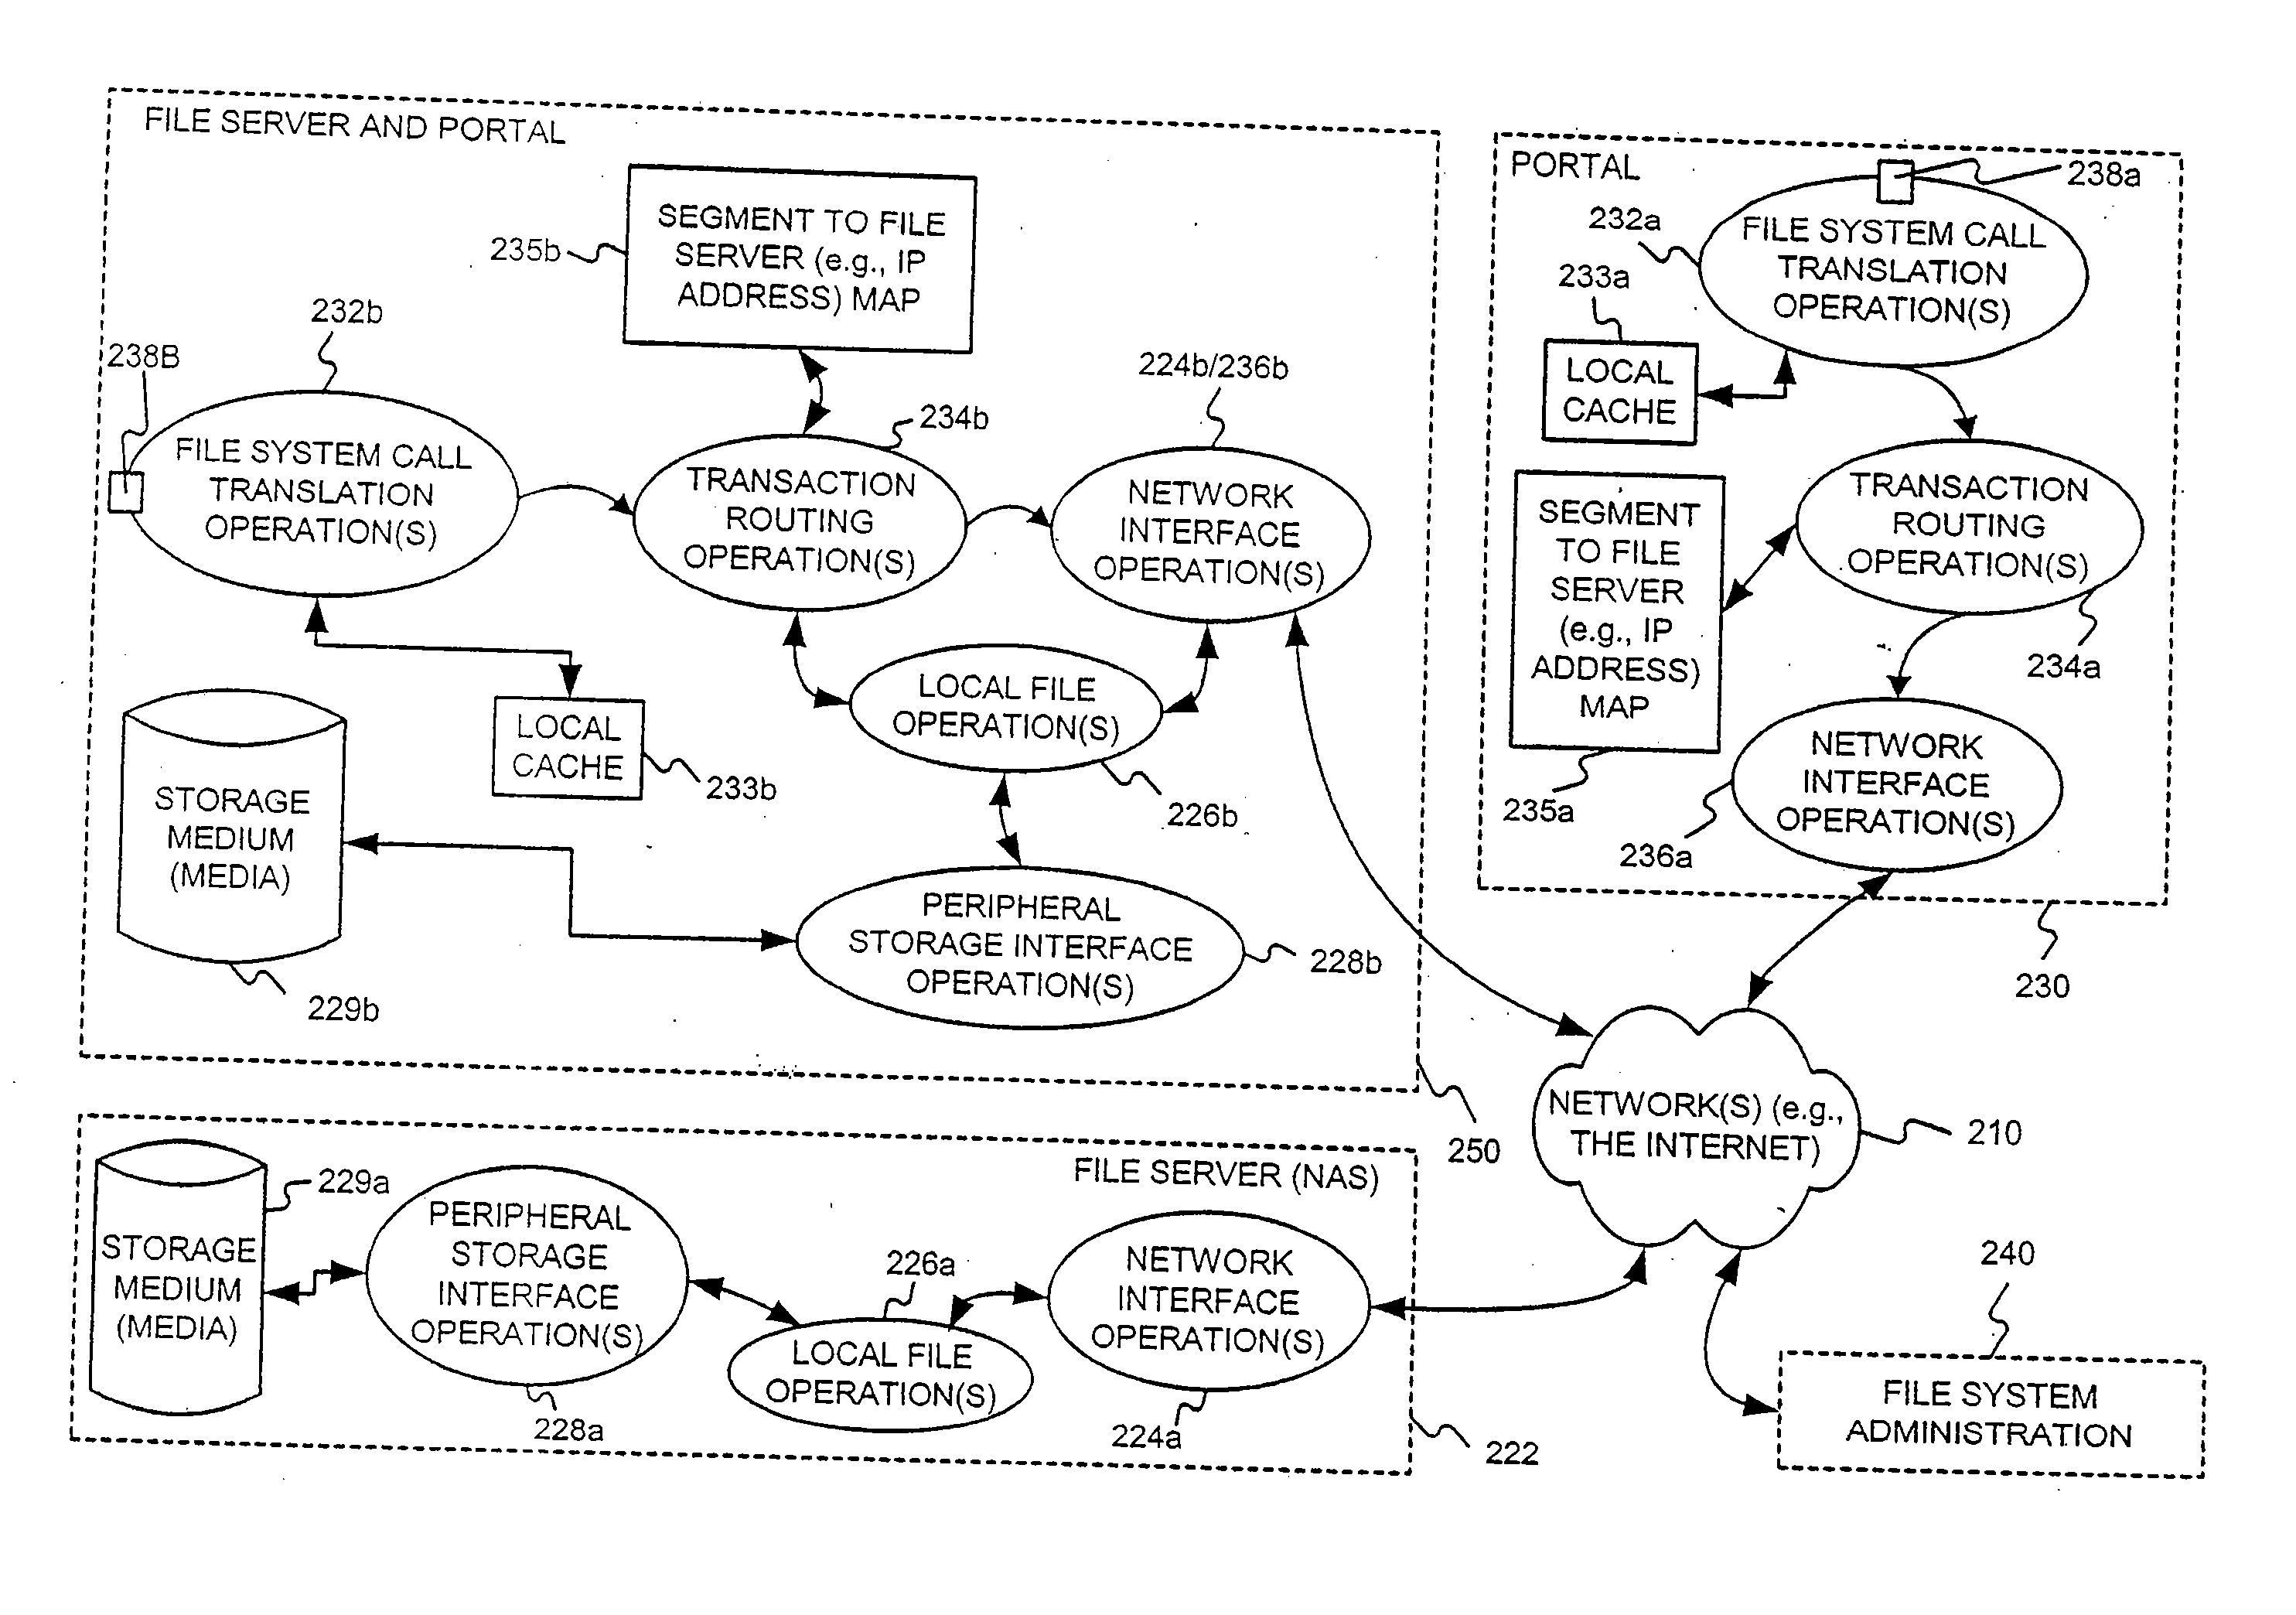 Migration of control in a distributed segmented file system